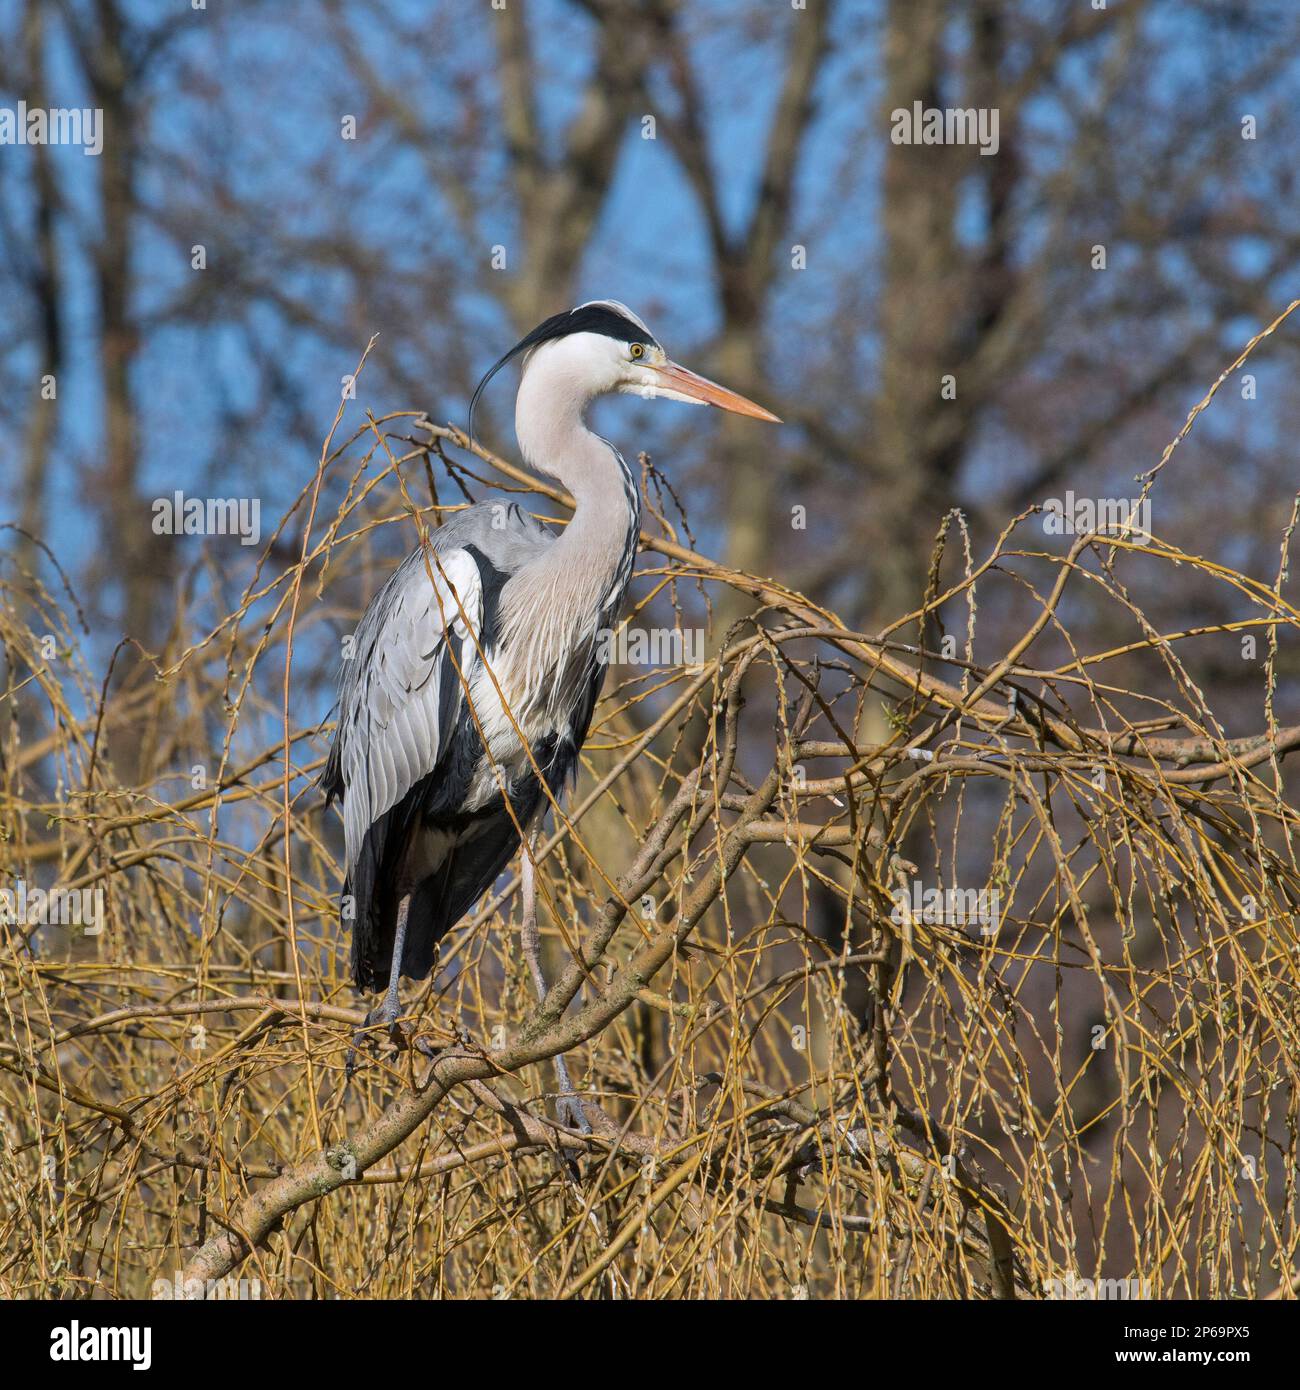 Grey heron (Ardea cinerea) perched in weeping willow tree at heronry / heron rookery in late winter Stock Photo